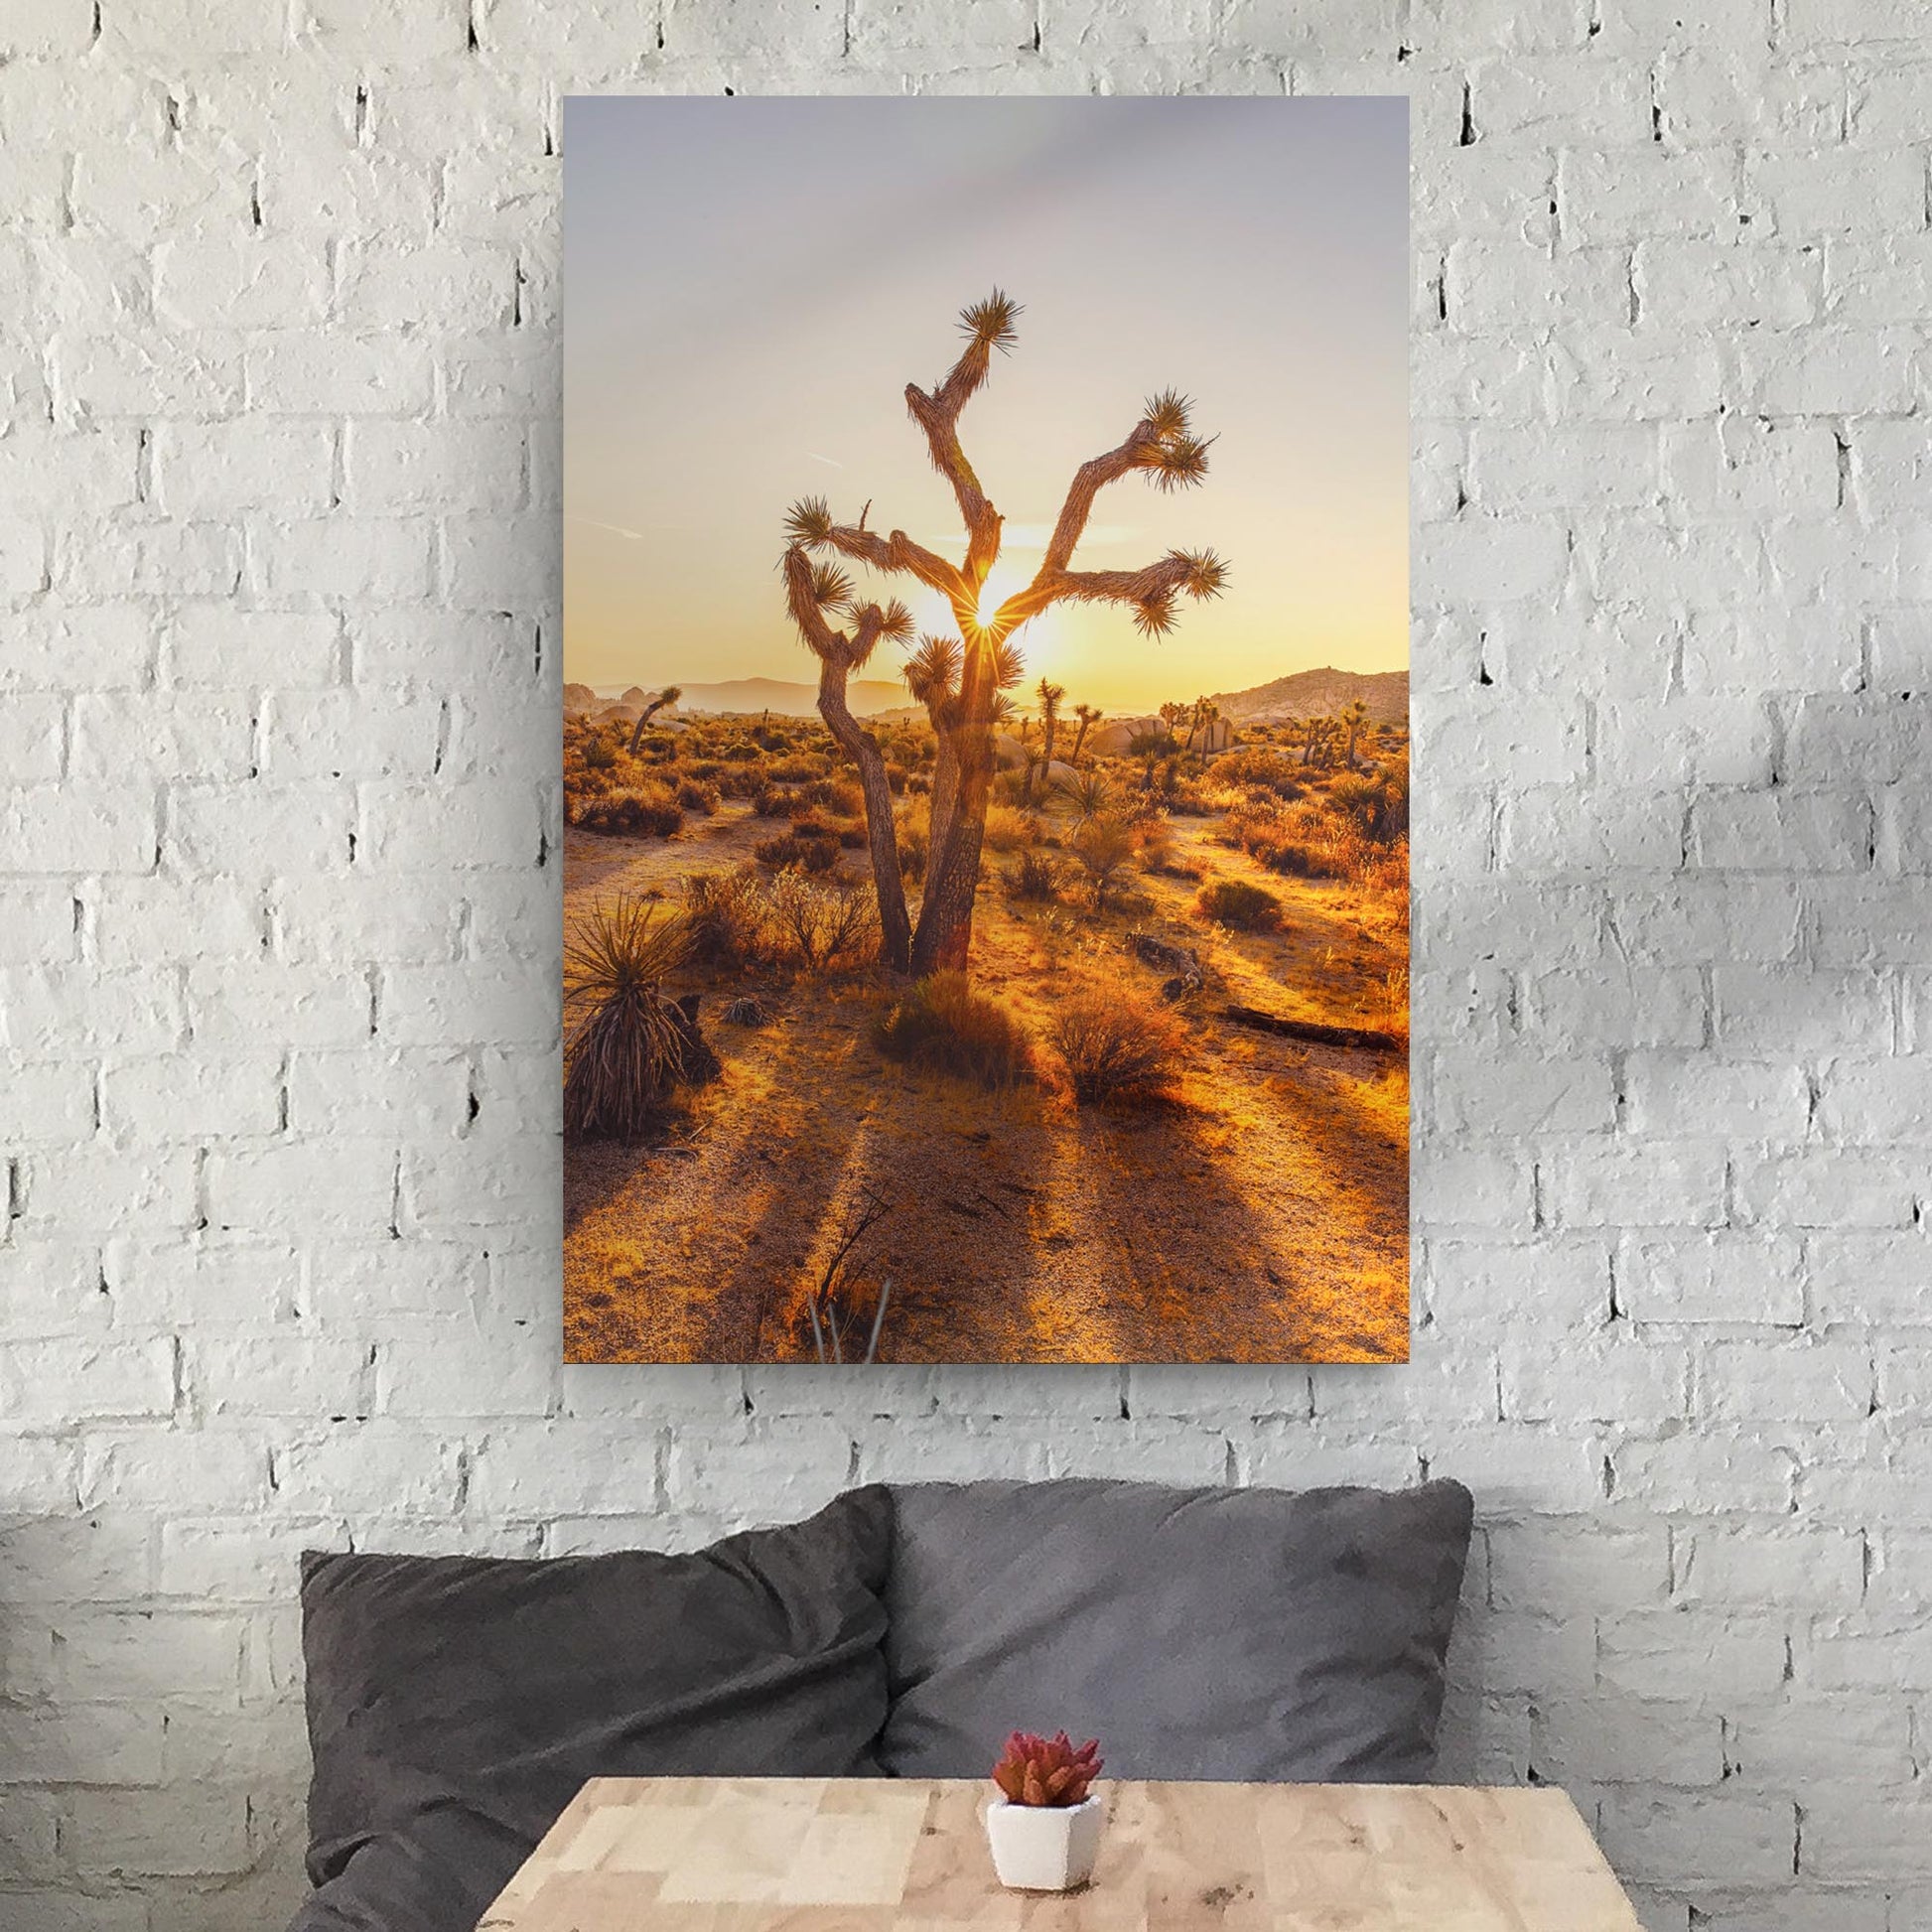 Joshua Tree Of The Mojave And Colorado Deserts Canvas Wall Art Style 2 - Image by Tailored Canvases